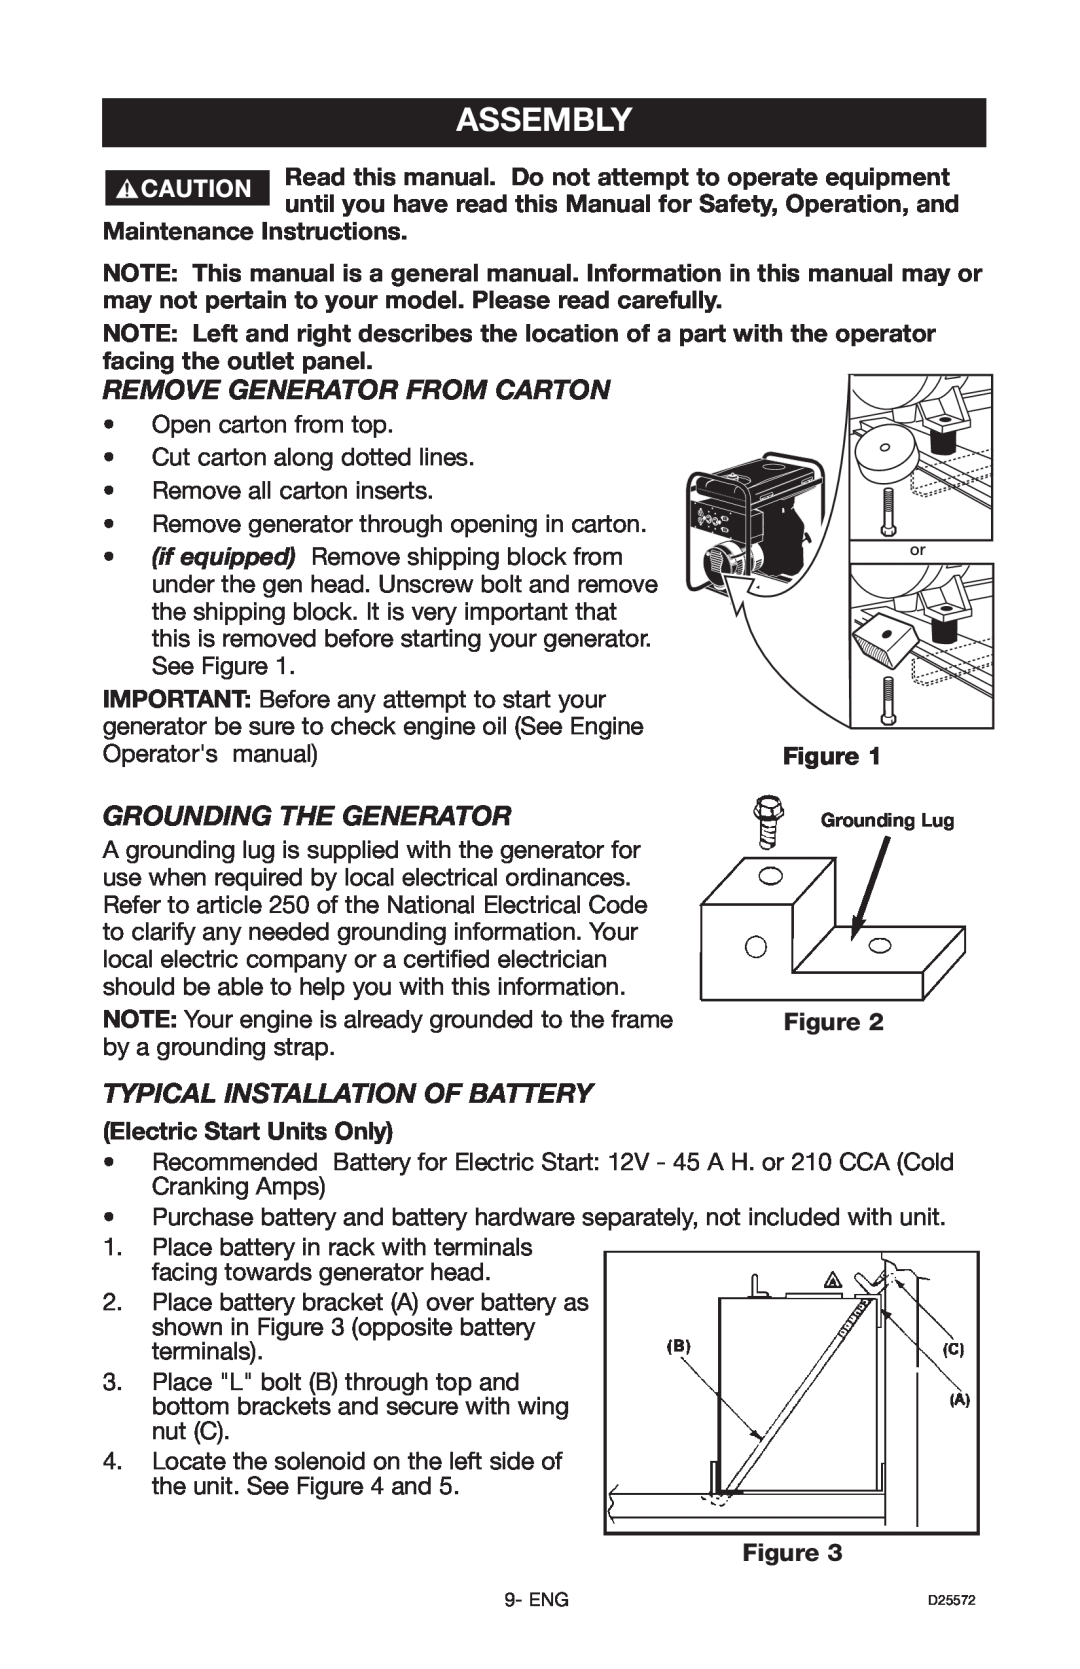 DeVillbiss Air Power Company D25572 warranty Assembly, Remove Generator From Carton, Grounding The Generator 